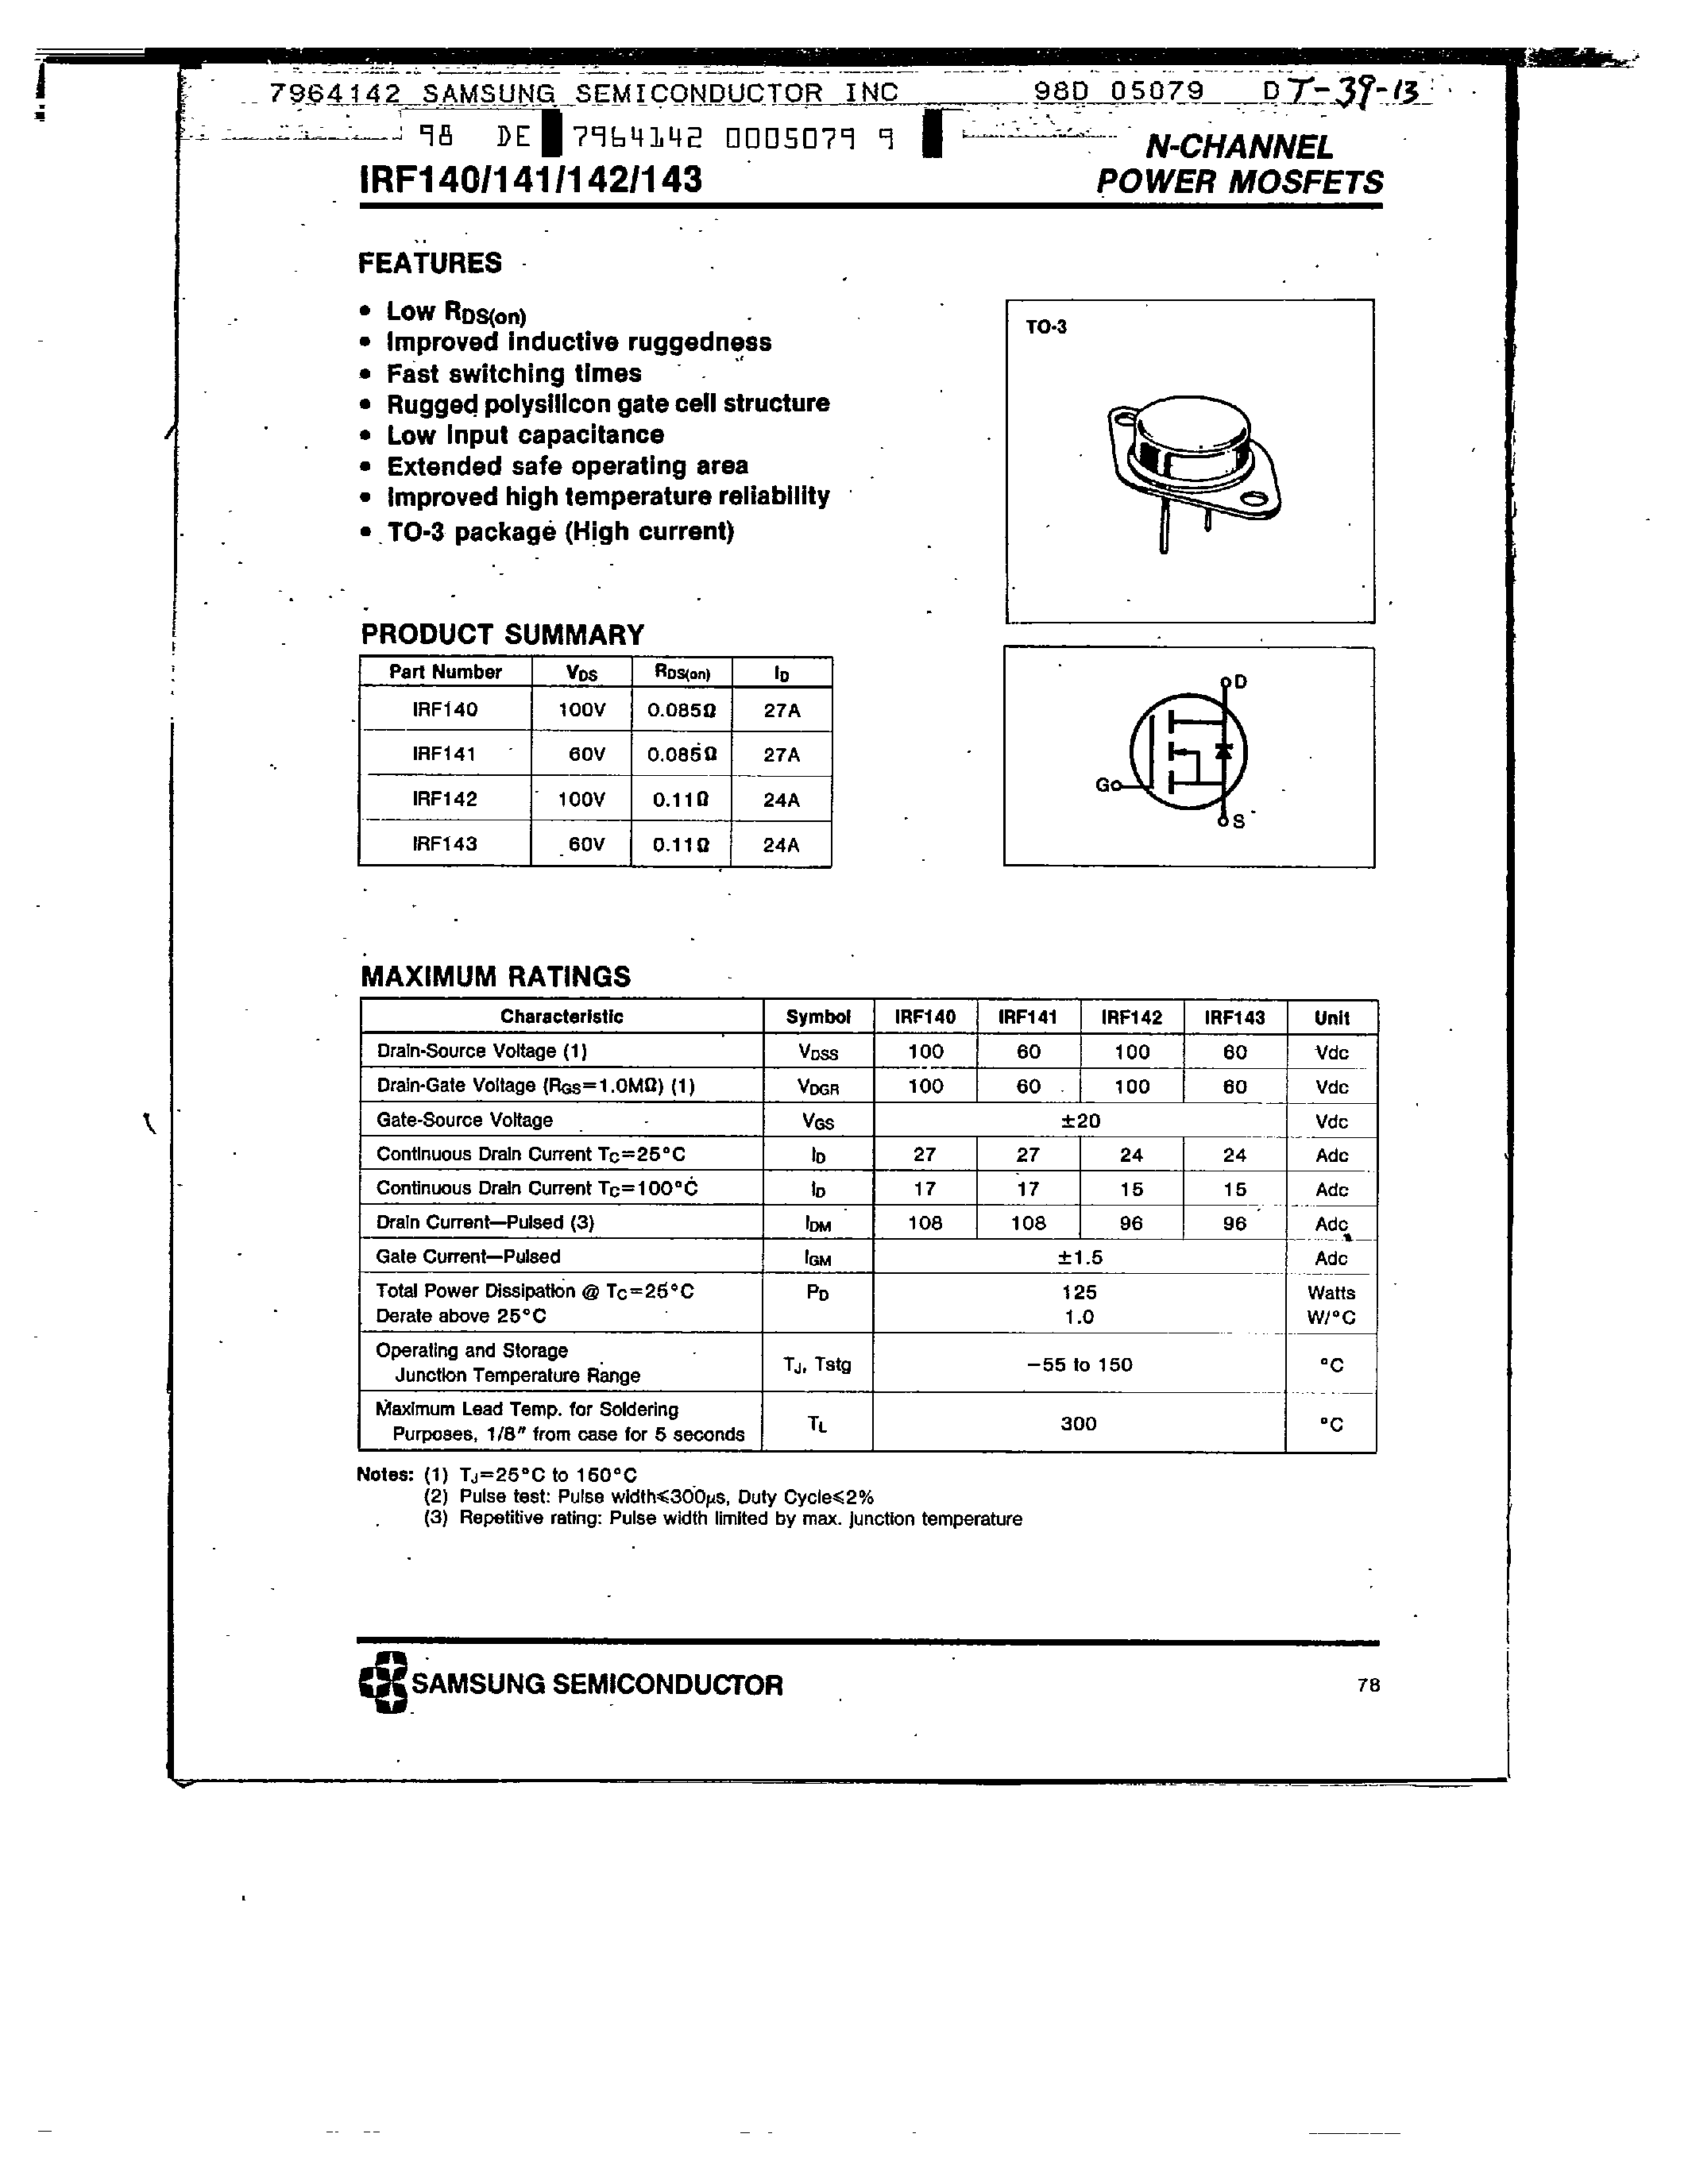 Datasheet IRF143 - N-CHANNEL POWER MOSFETS page 1